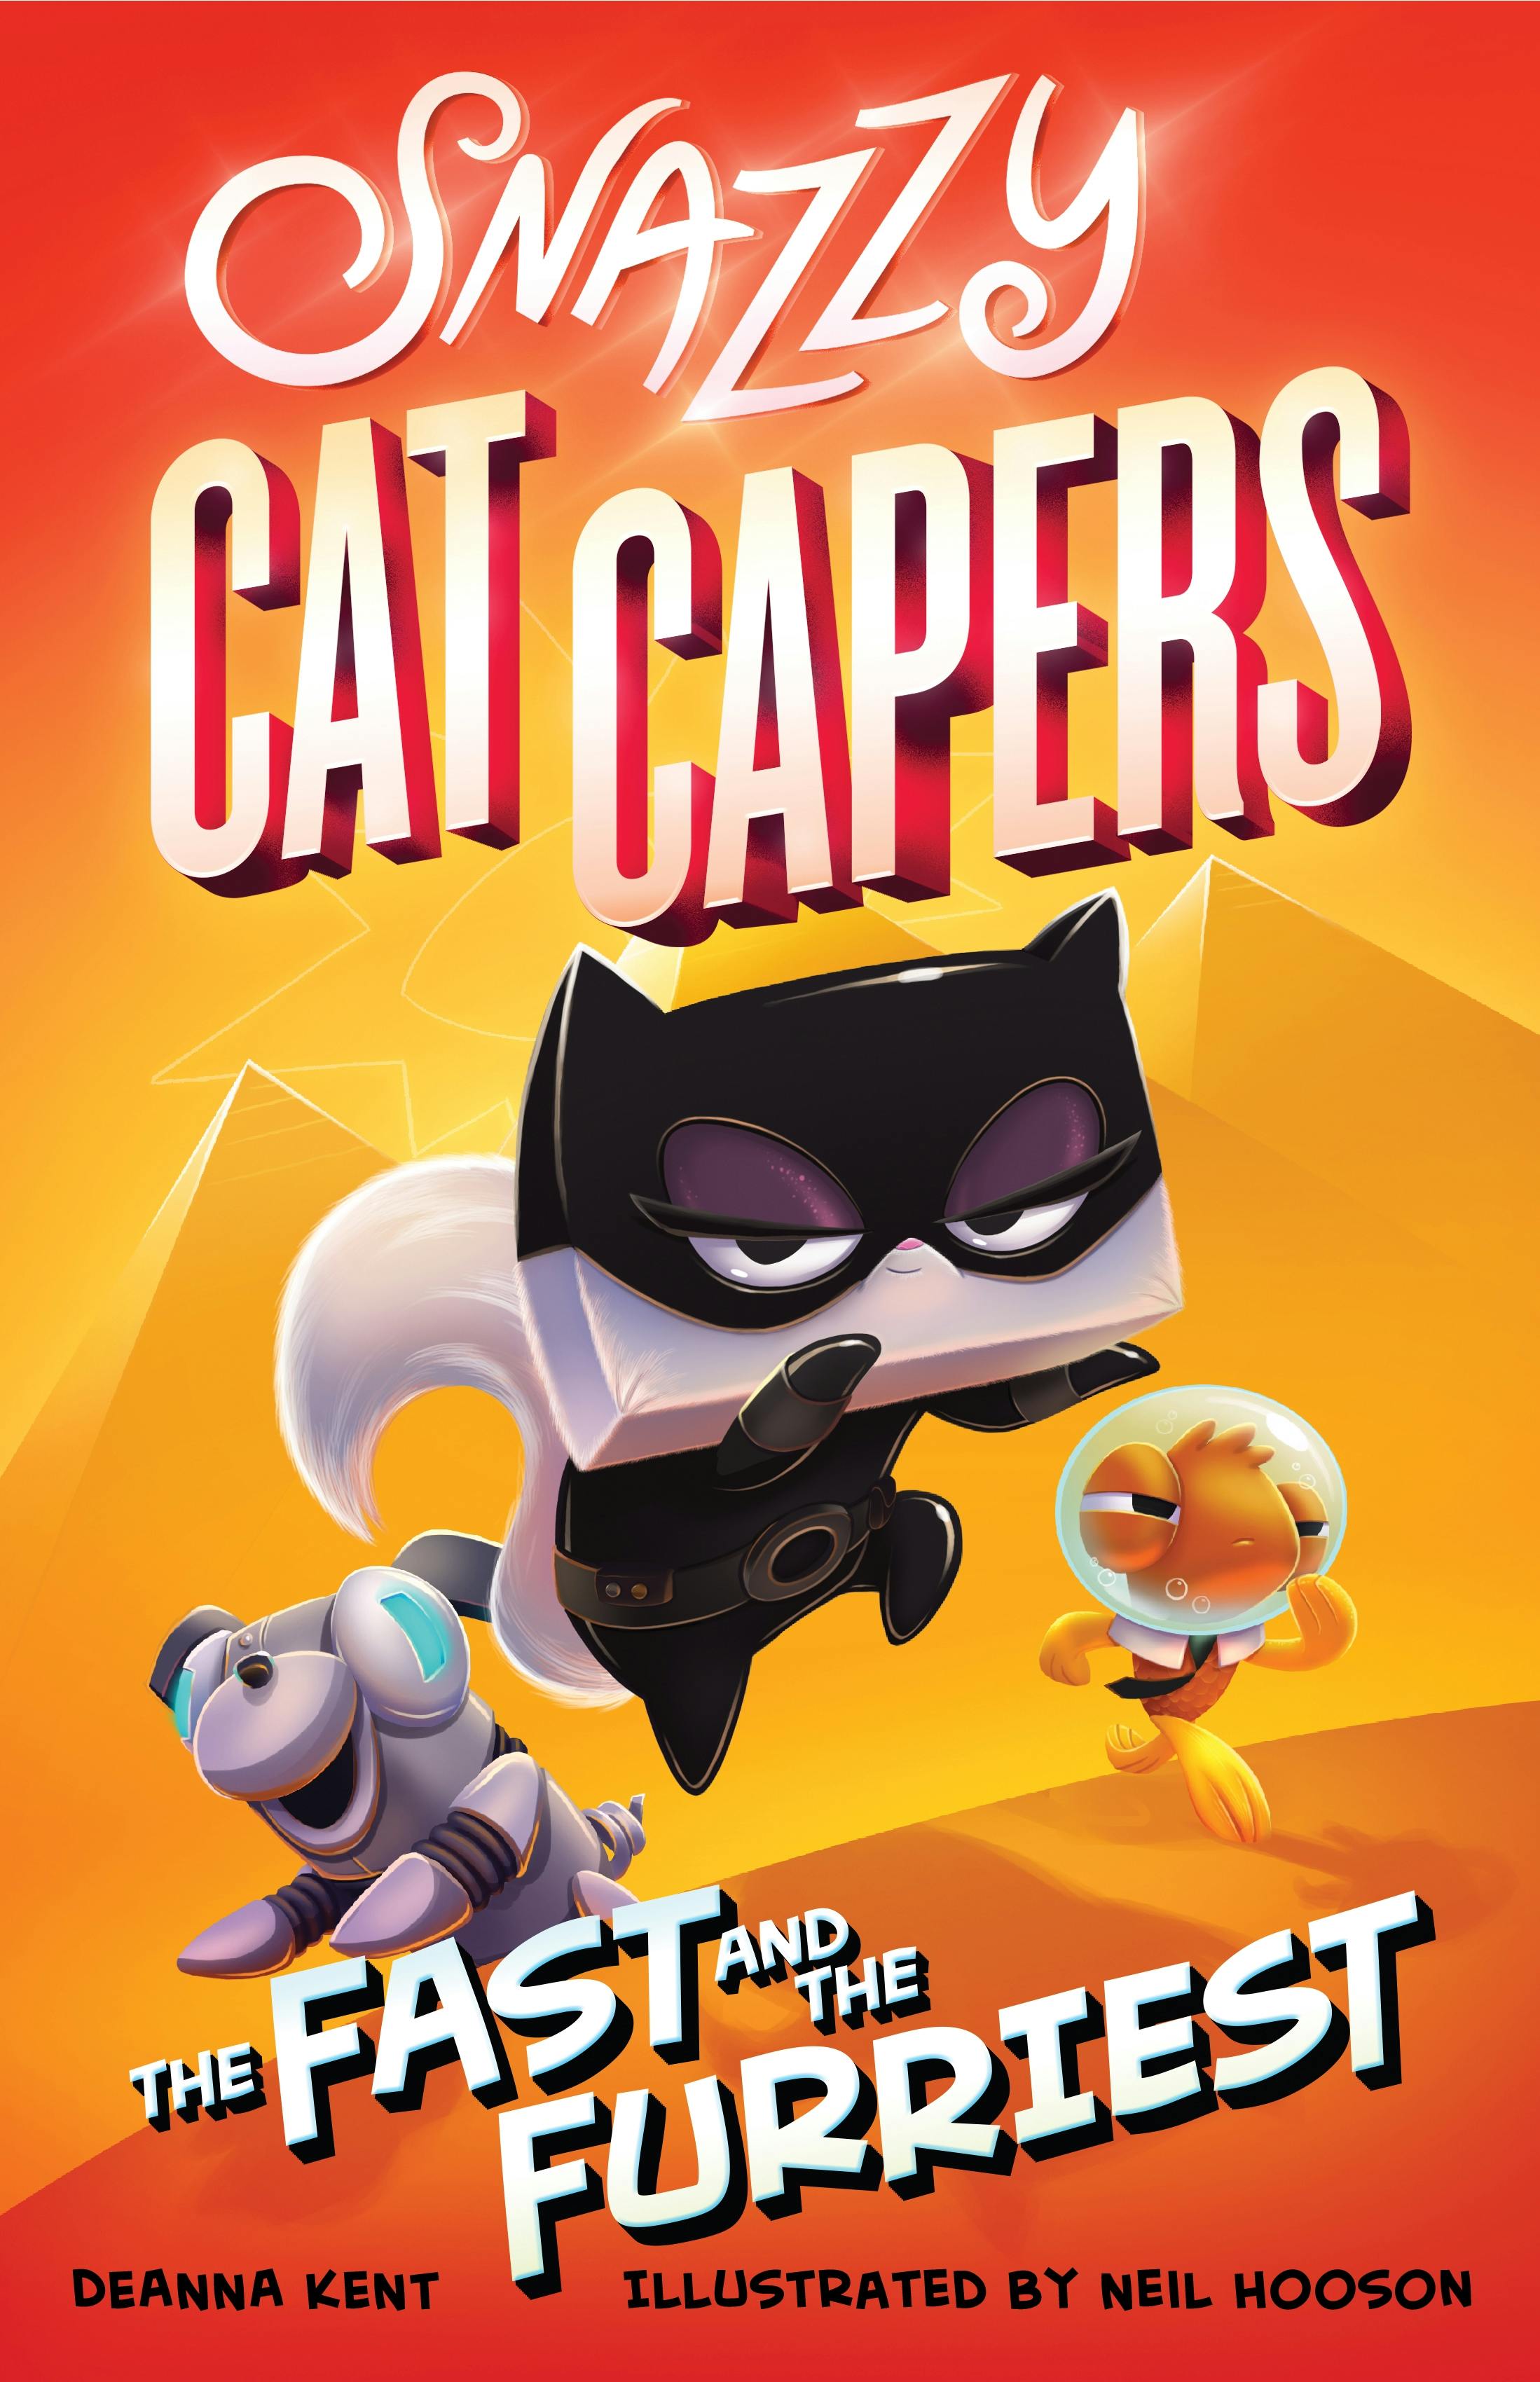 Image of Snazzy Cat Capers: The Fast and the Furriest